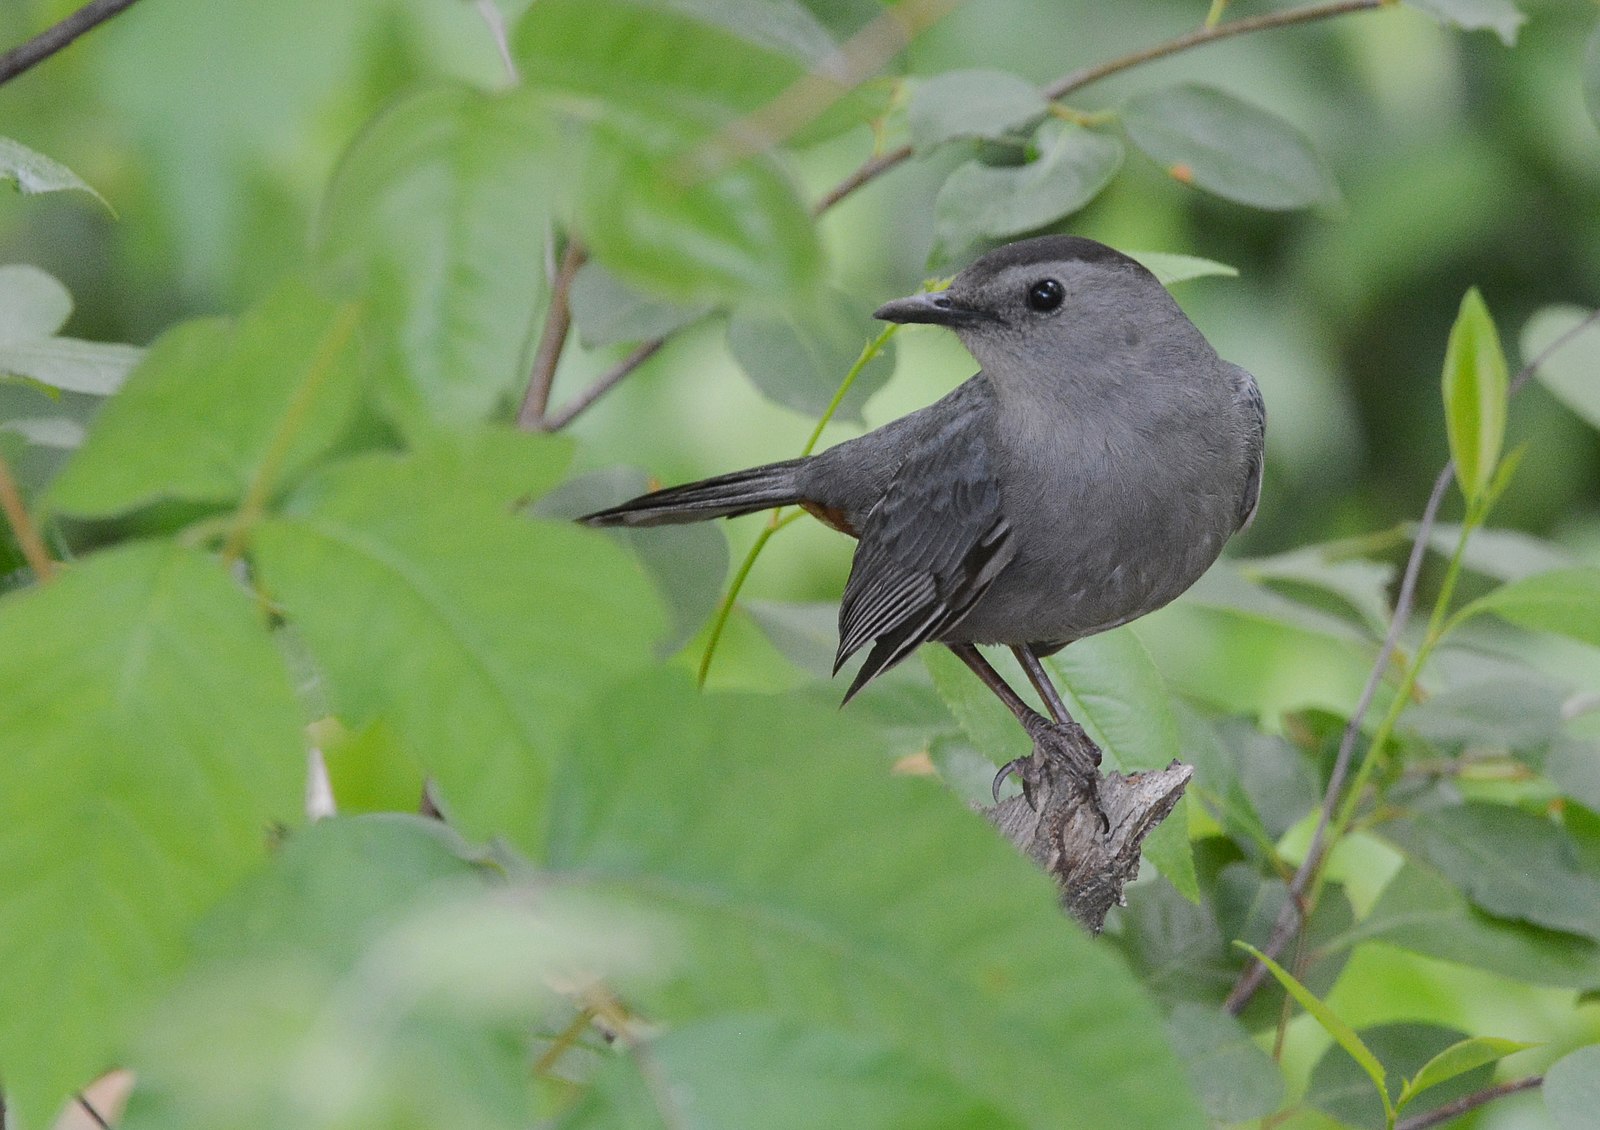 Grey Catbird perched in a tree, looking at the camera.